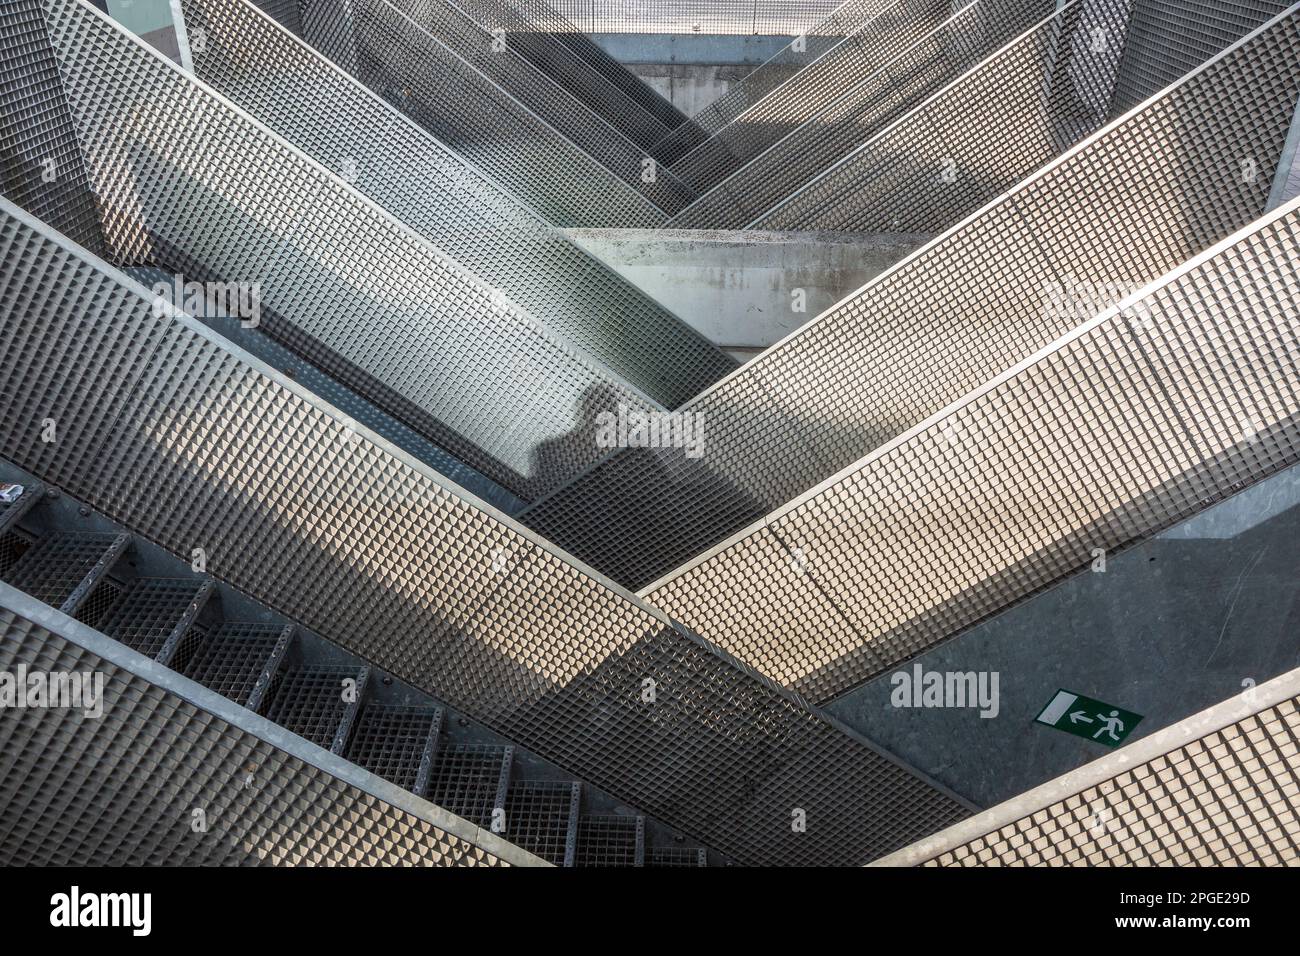 Emergency stairs system of a metro station deployed during maintenance. Place Rogier, Brussels. Stock Photo